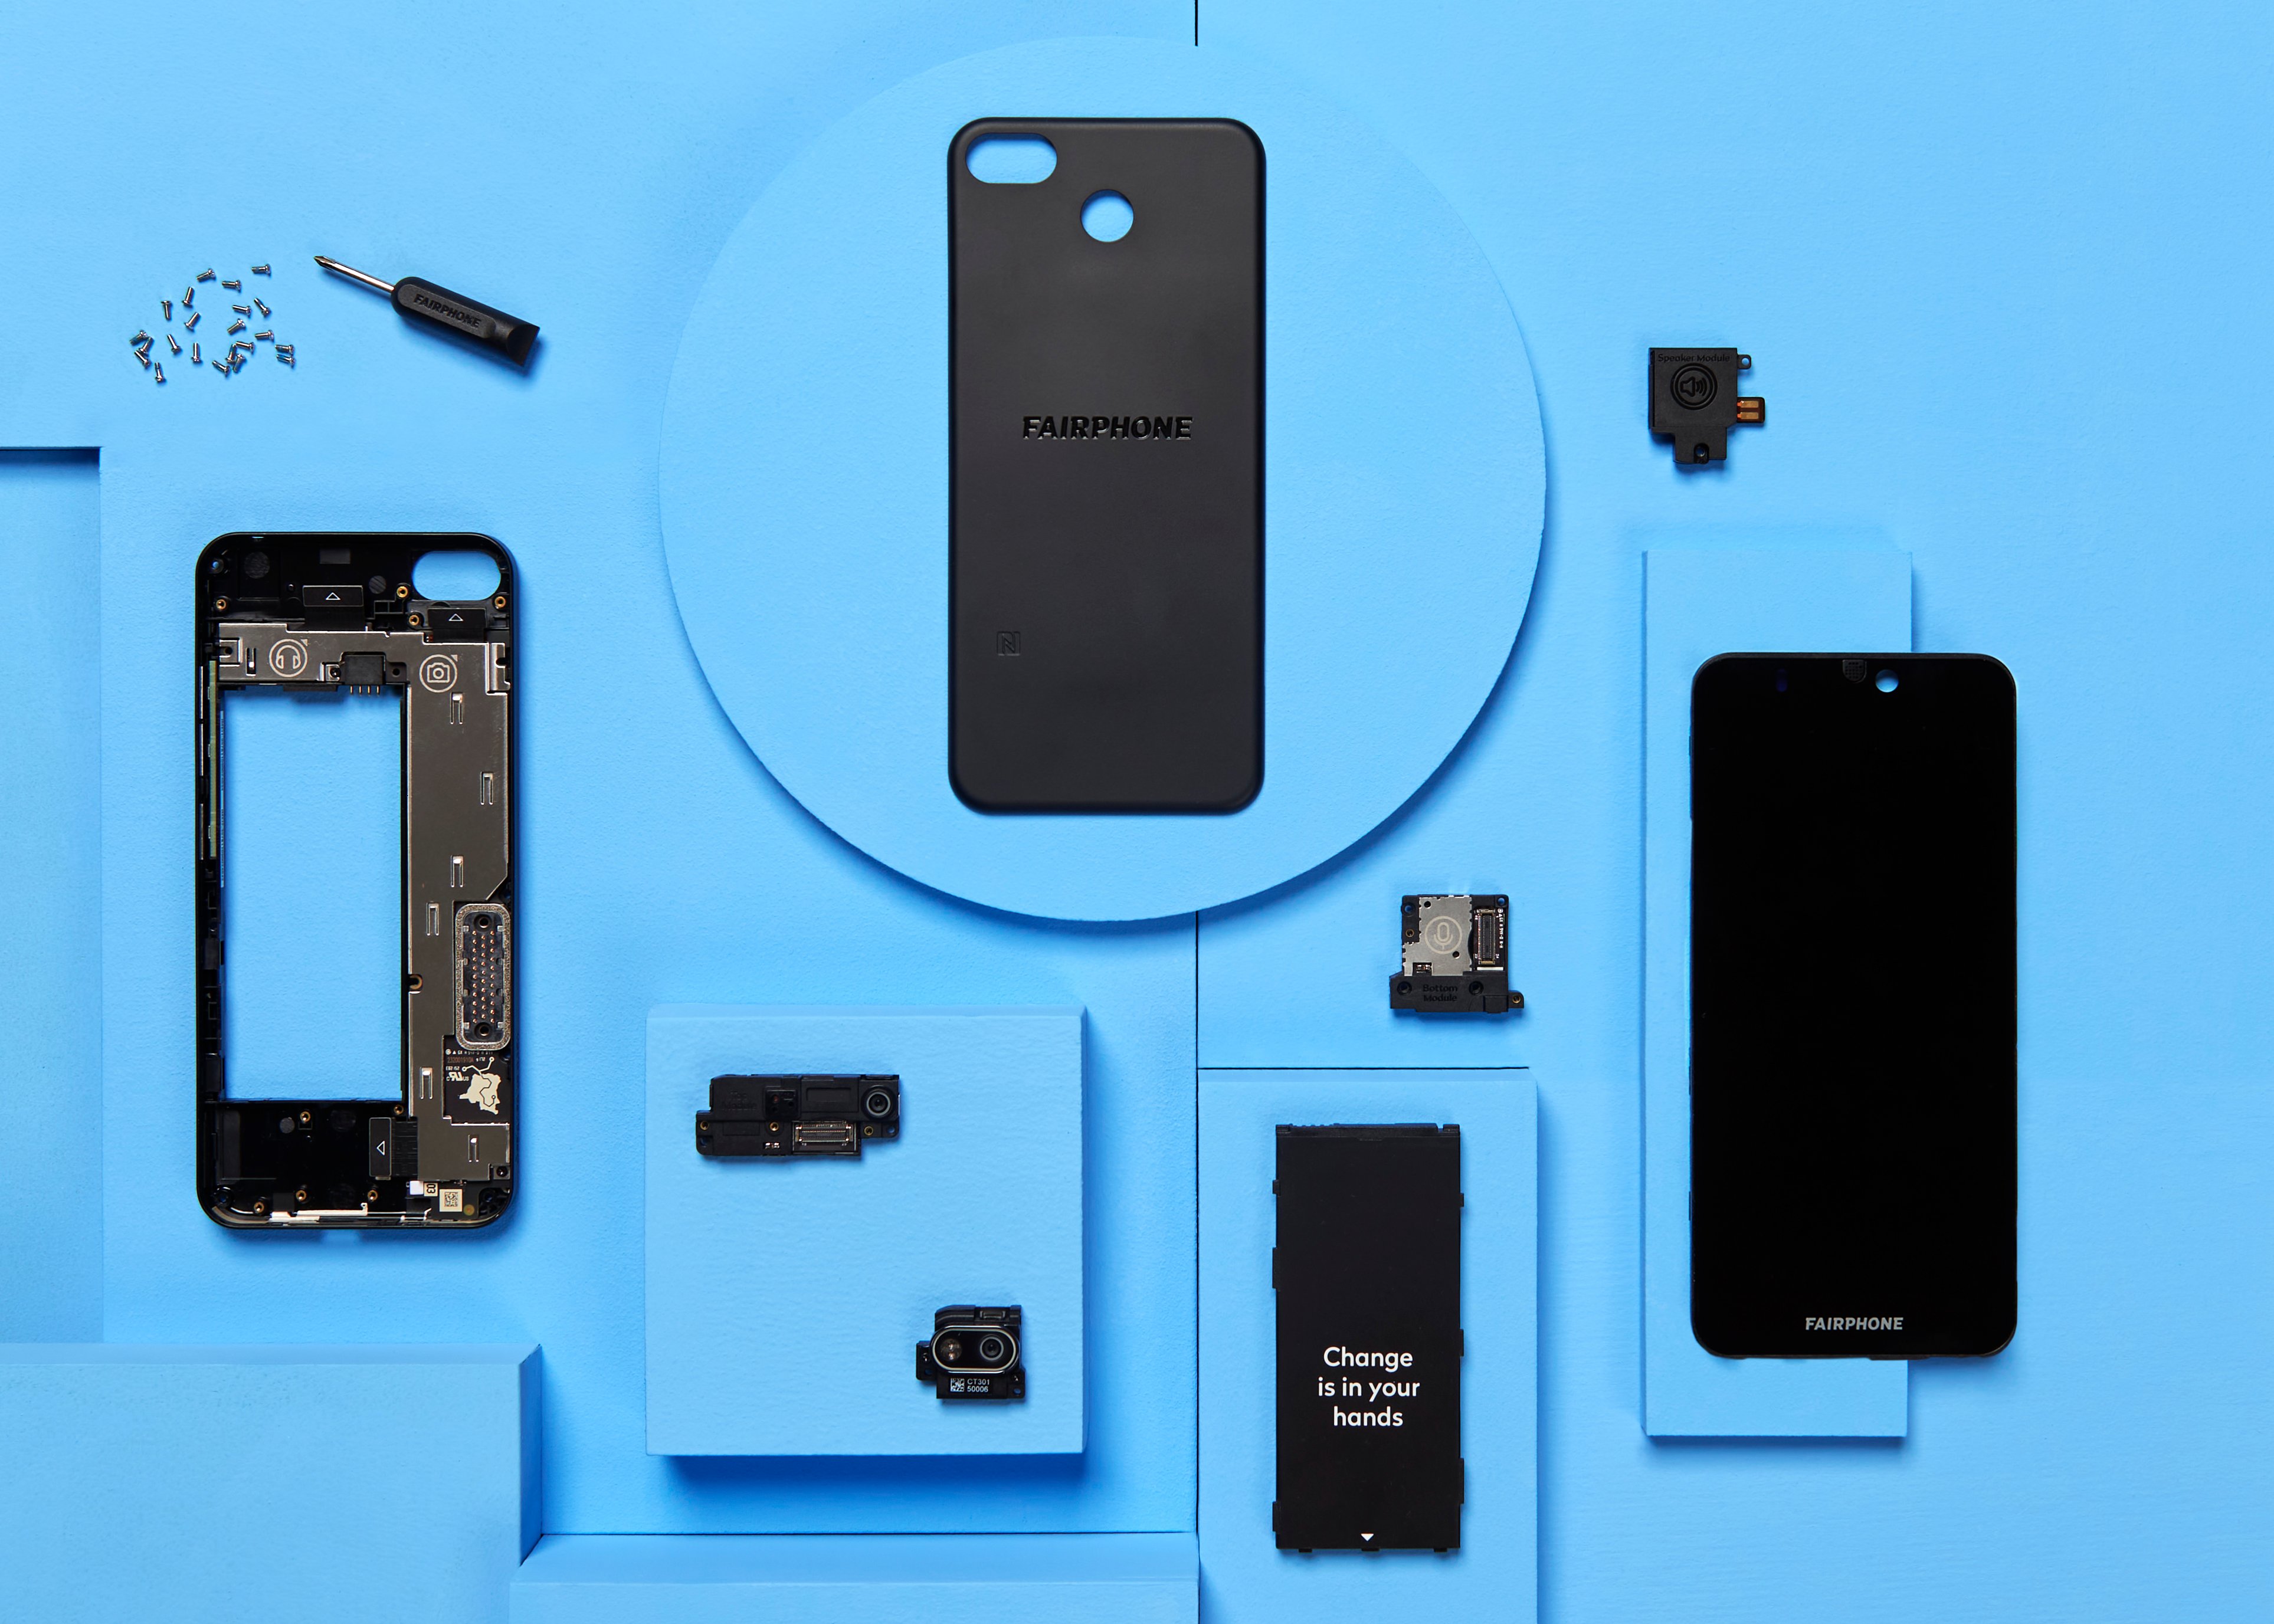 Fairphone 5 officially launched as the most repairable smartphone